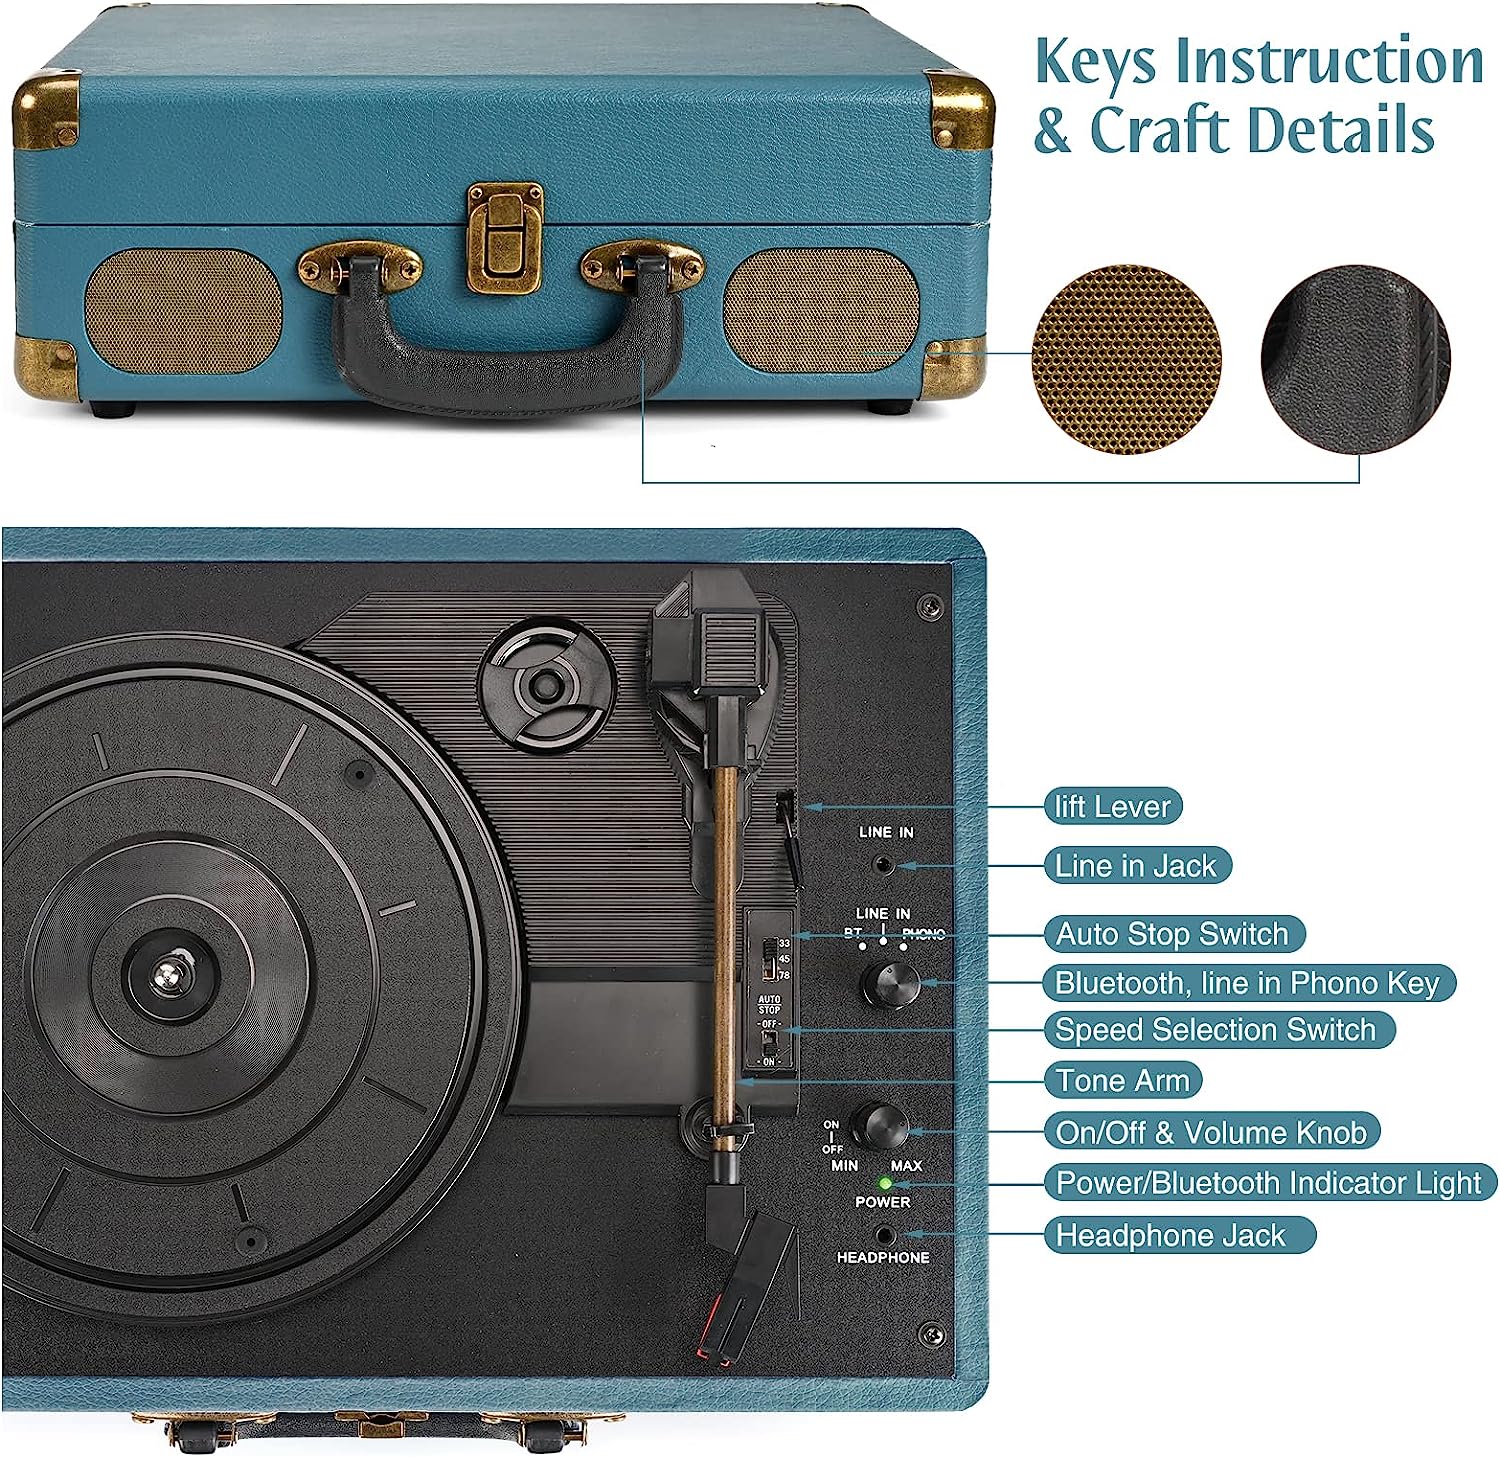 Vinyl Account Player 3-Speed Bluetooth Suitcase Portable Belt-Driven Record Player with Built-in Speakers RCA Line Out AUX in Headphone Jack Vintage Turntable